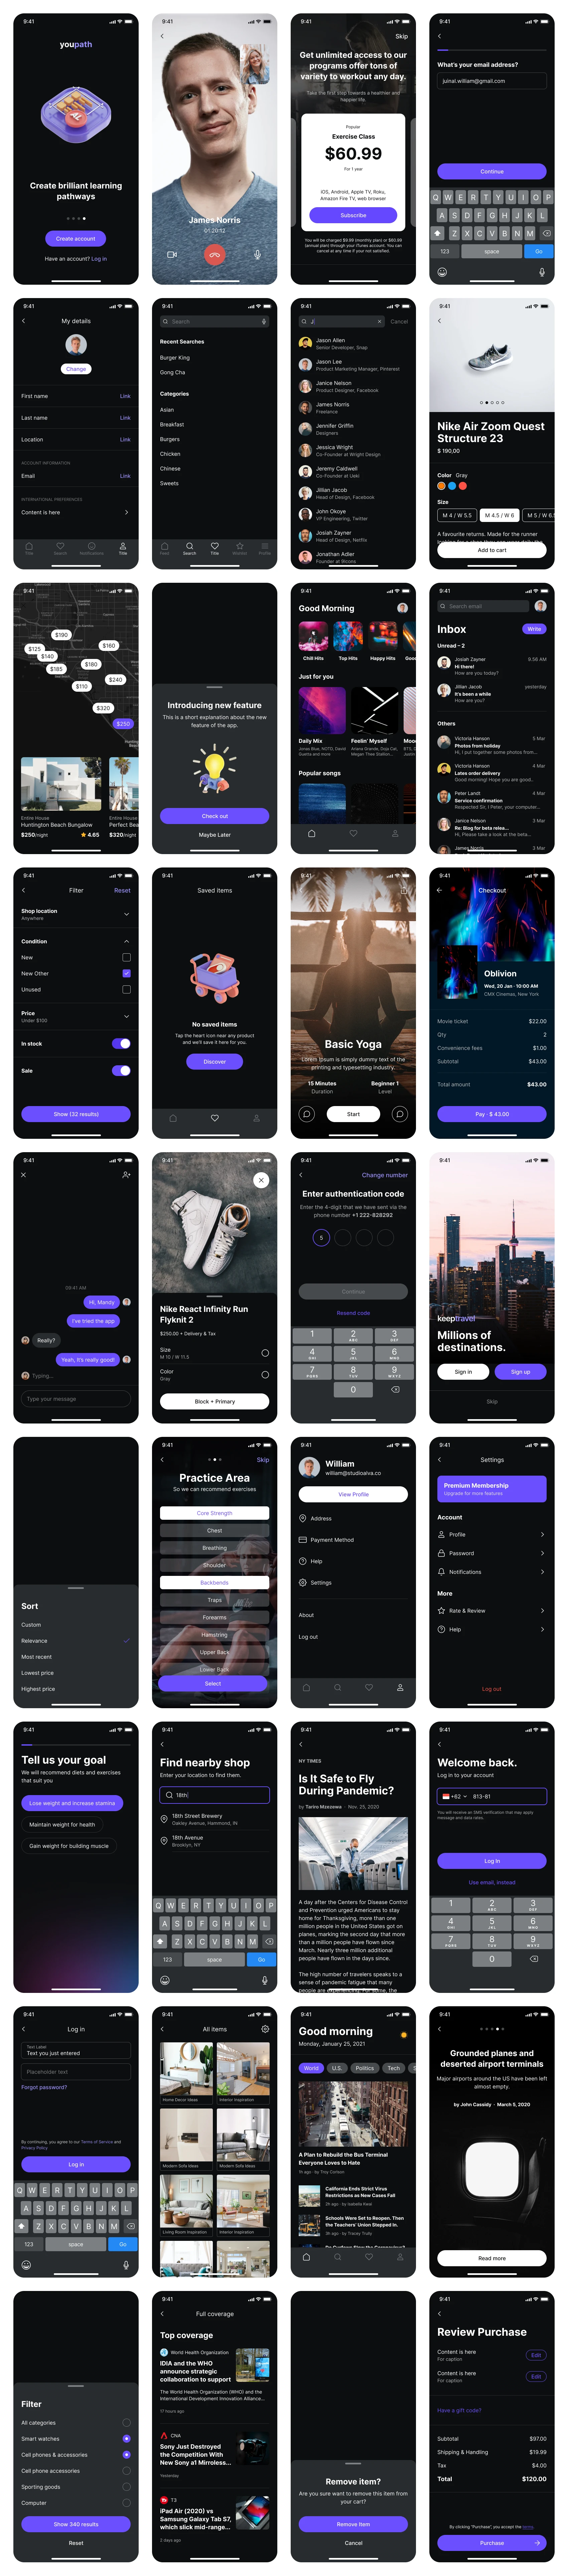 Nucleus Free UI Kit for Figma - Create mockup or prototype in Figma at speed. Nucleus is a free UI component library that provides you the building blocks you need to design your next mobile app.